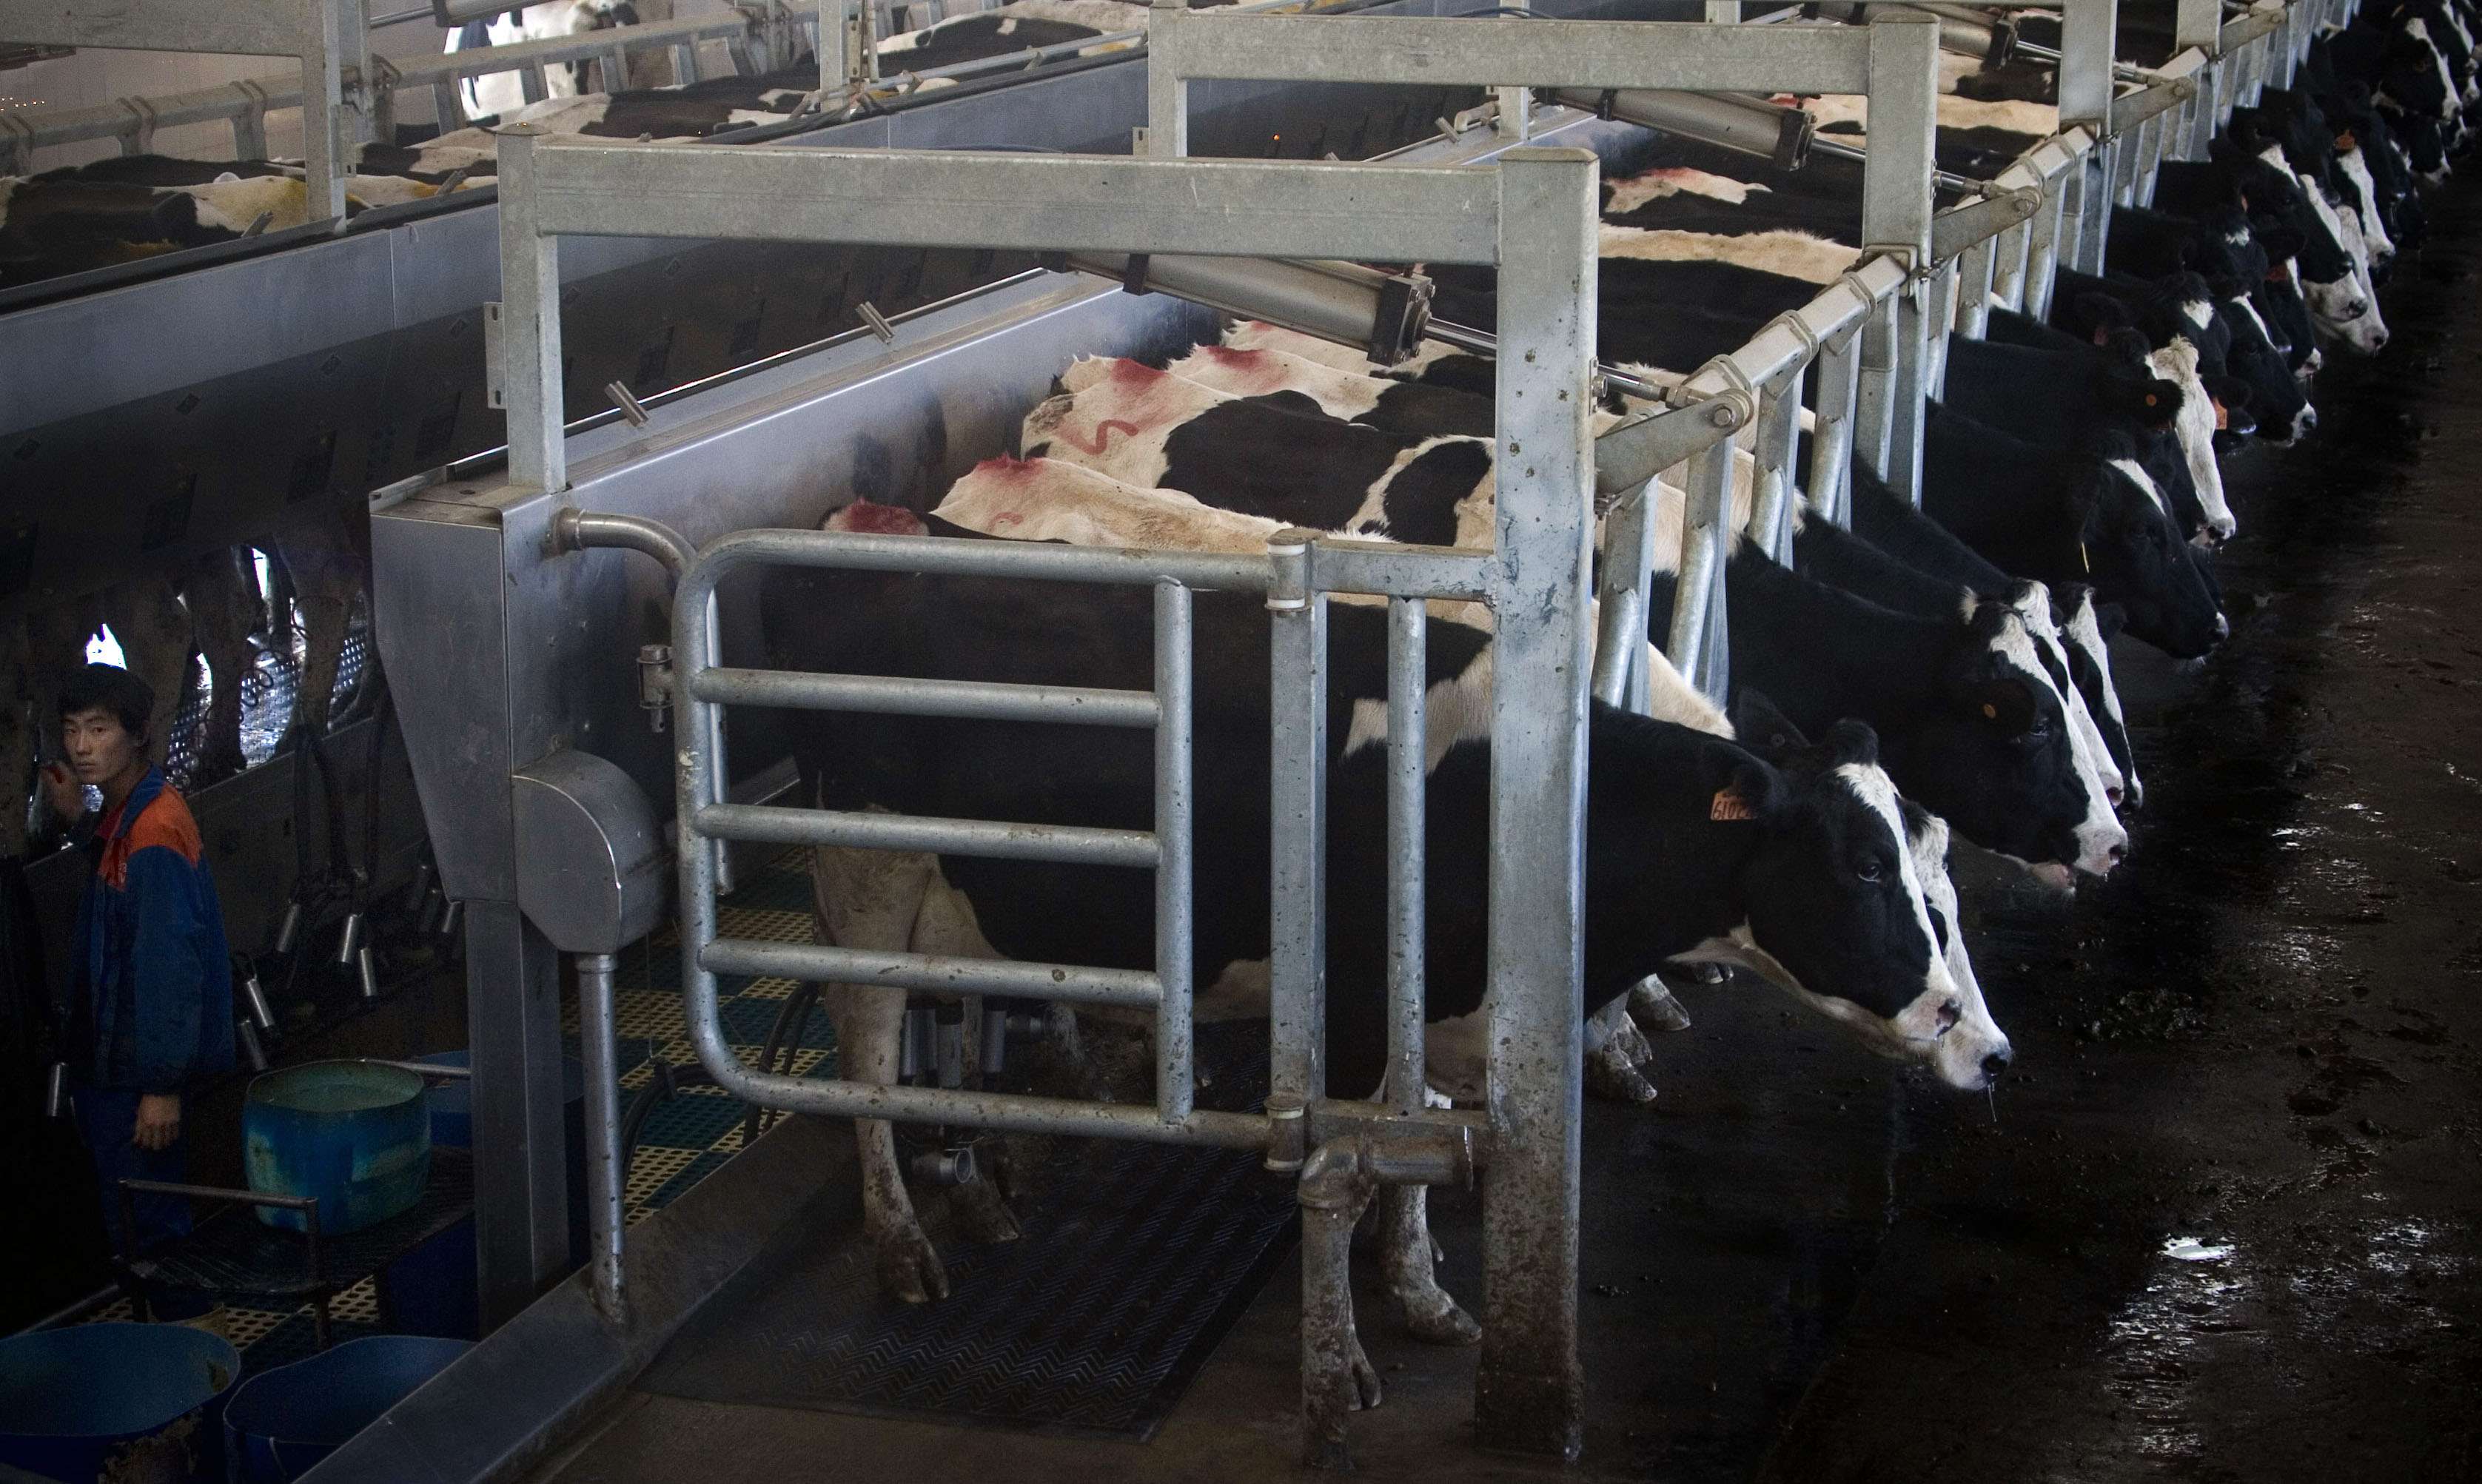 Cows get milked at a milking station owned by Mengniu in Hohhot, north China's Inner Mongolia region. Photo: AP